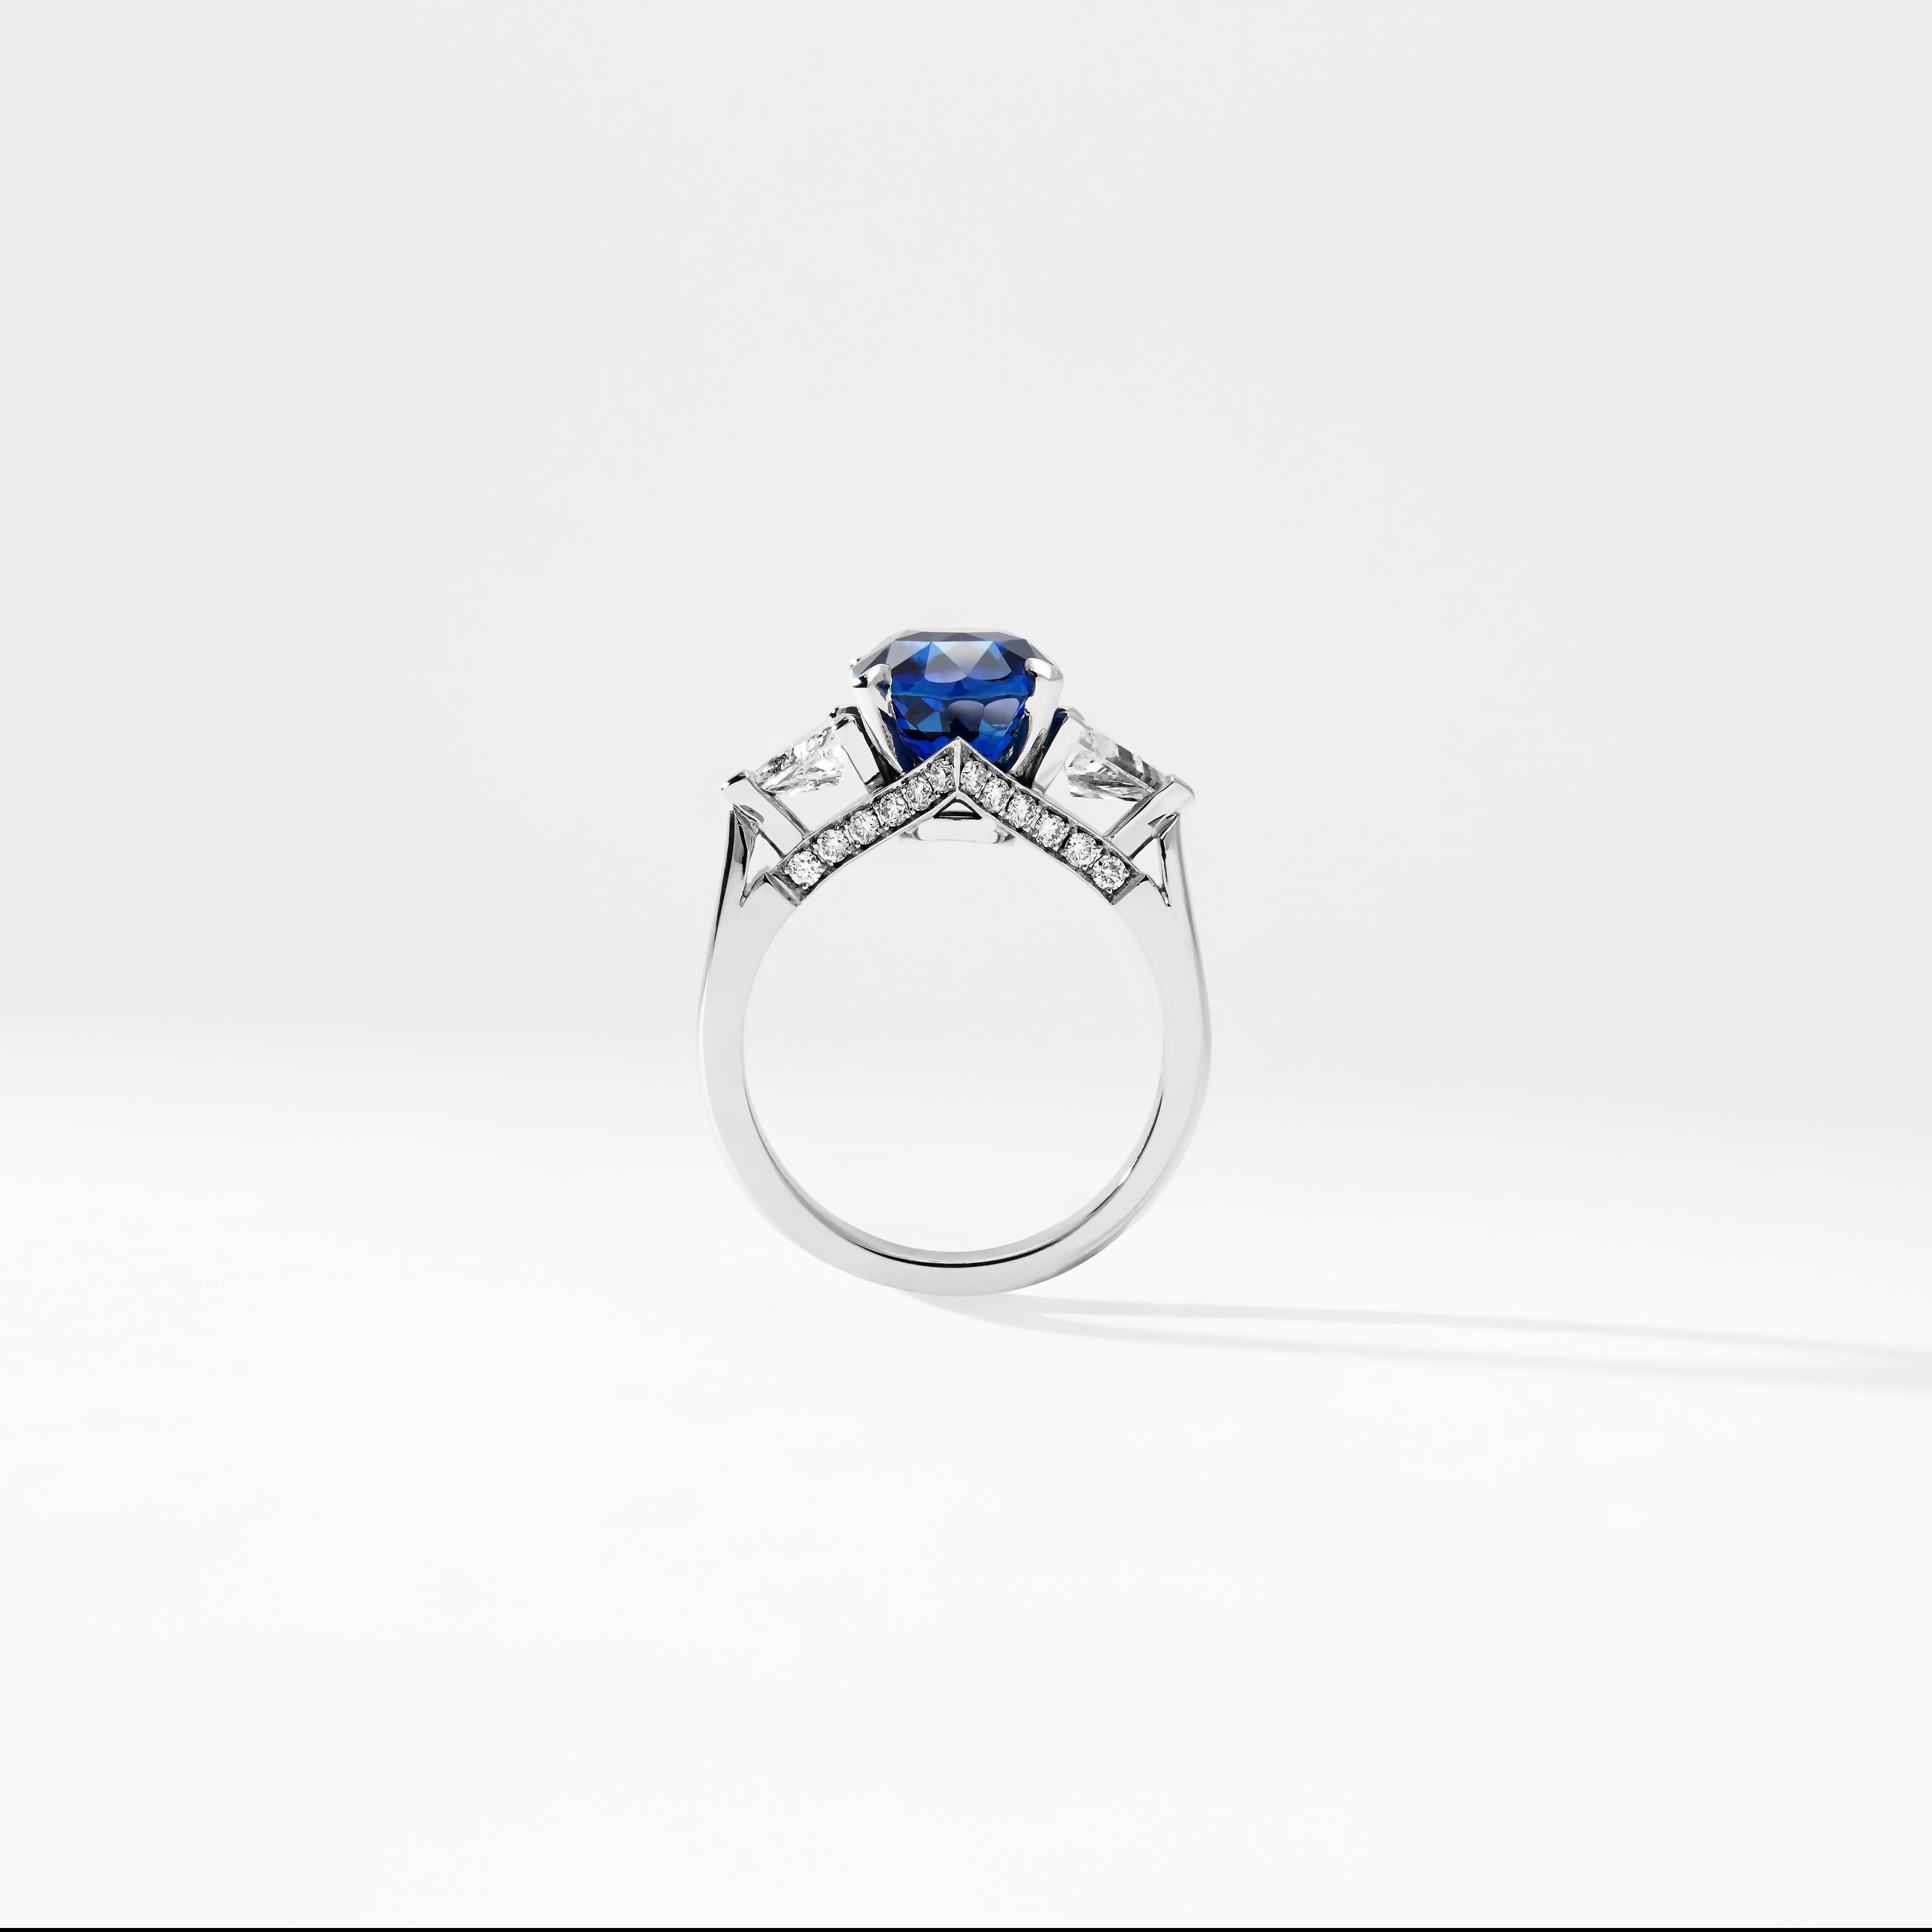 Oval Cut Fabergé Platinum Oval 5.12ct Royal Blue Sapphire Ring Set With White Diamonds For Sale